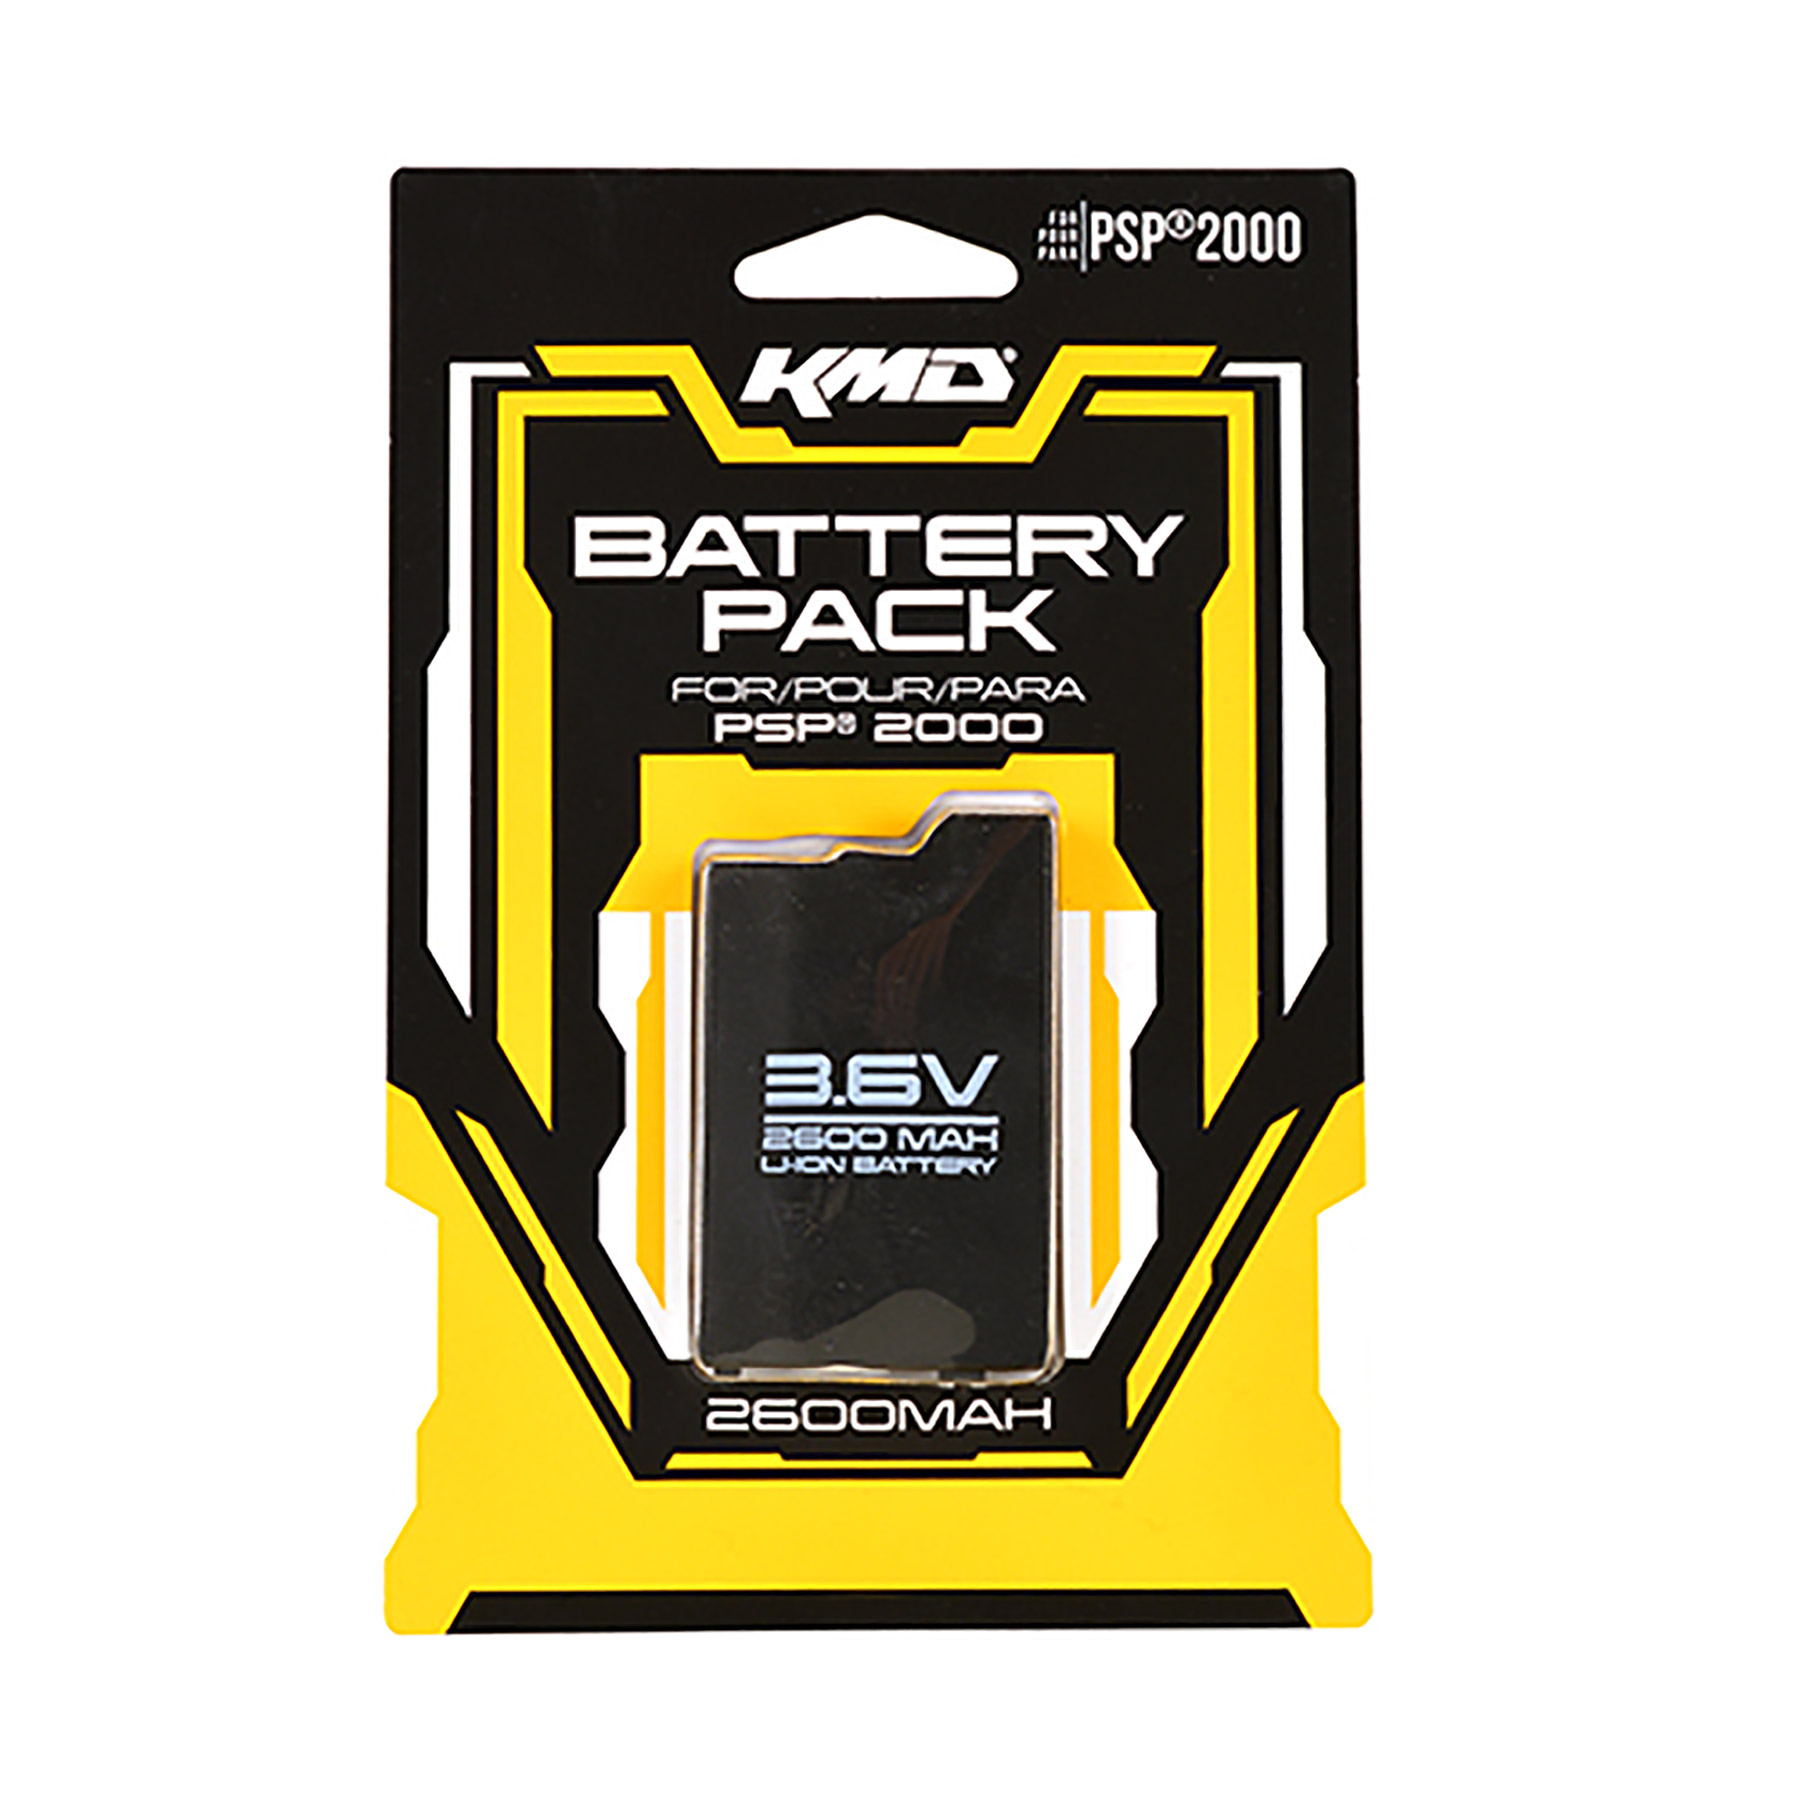 Psp 00 Battery Rechargeable Pack Kmd Game World